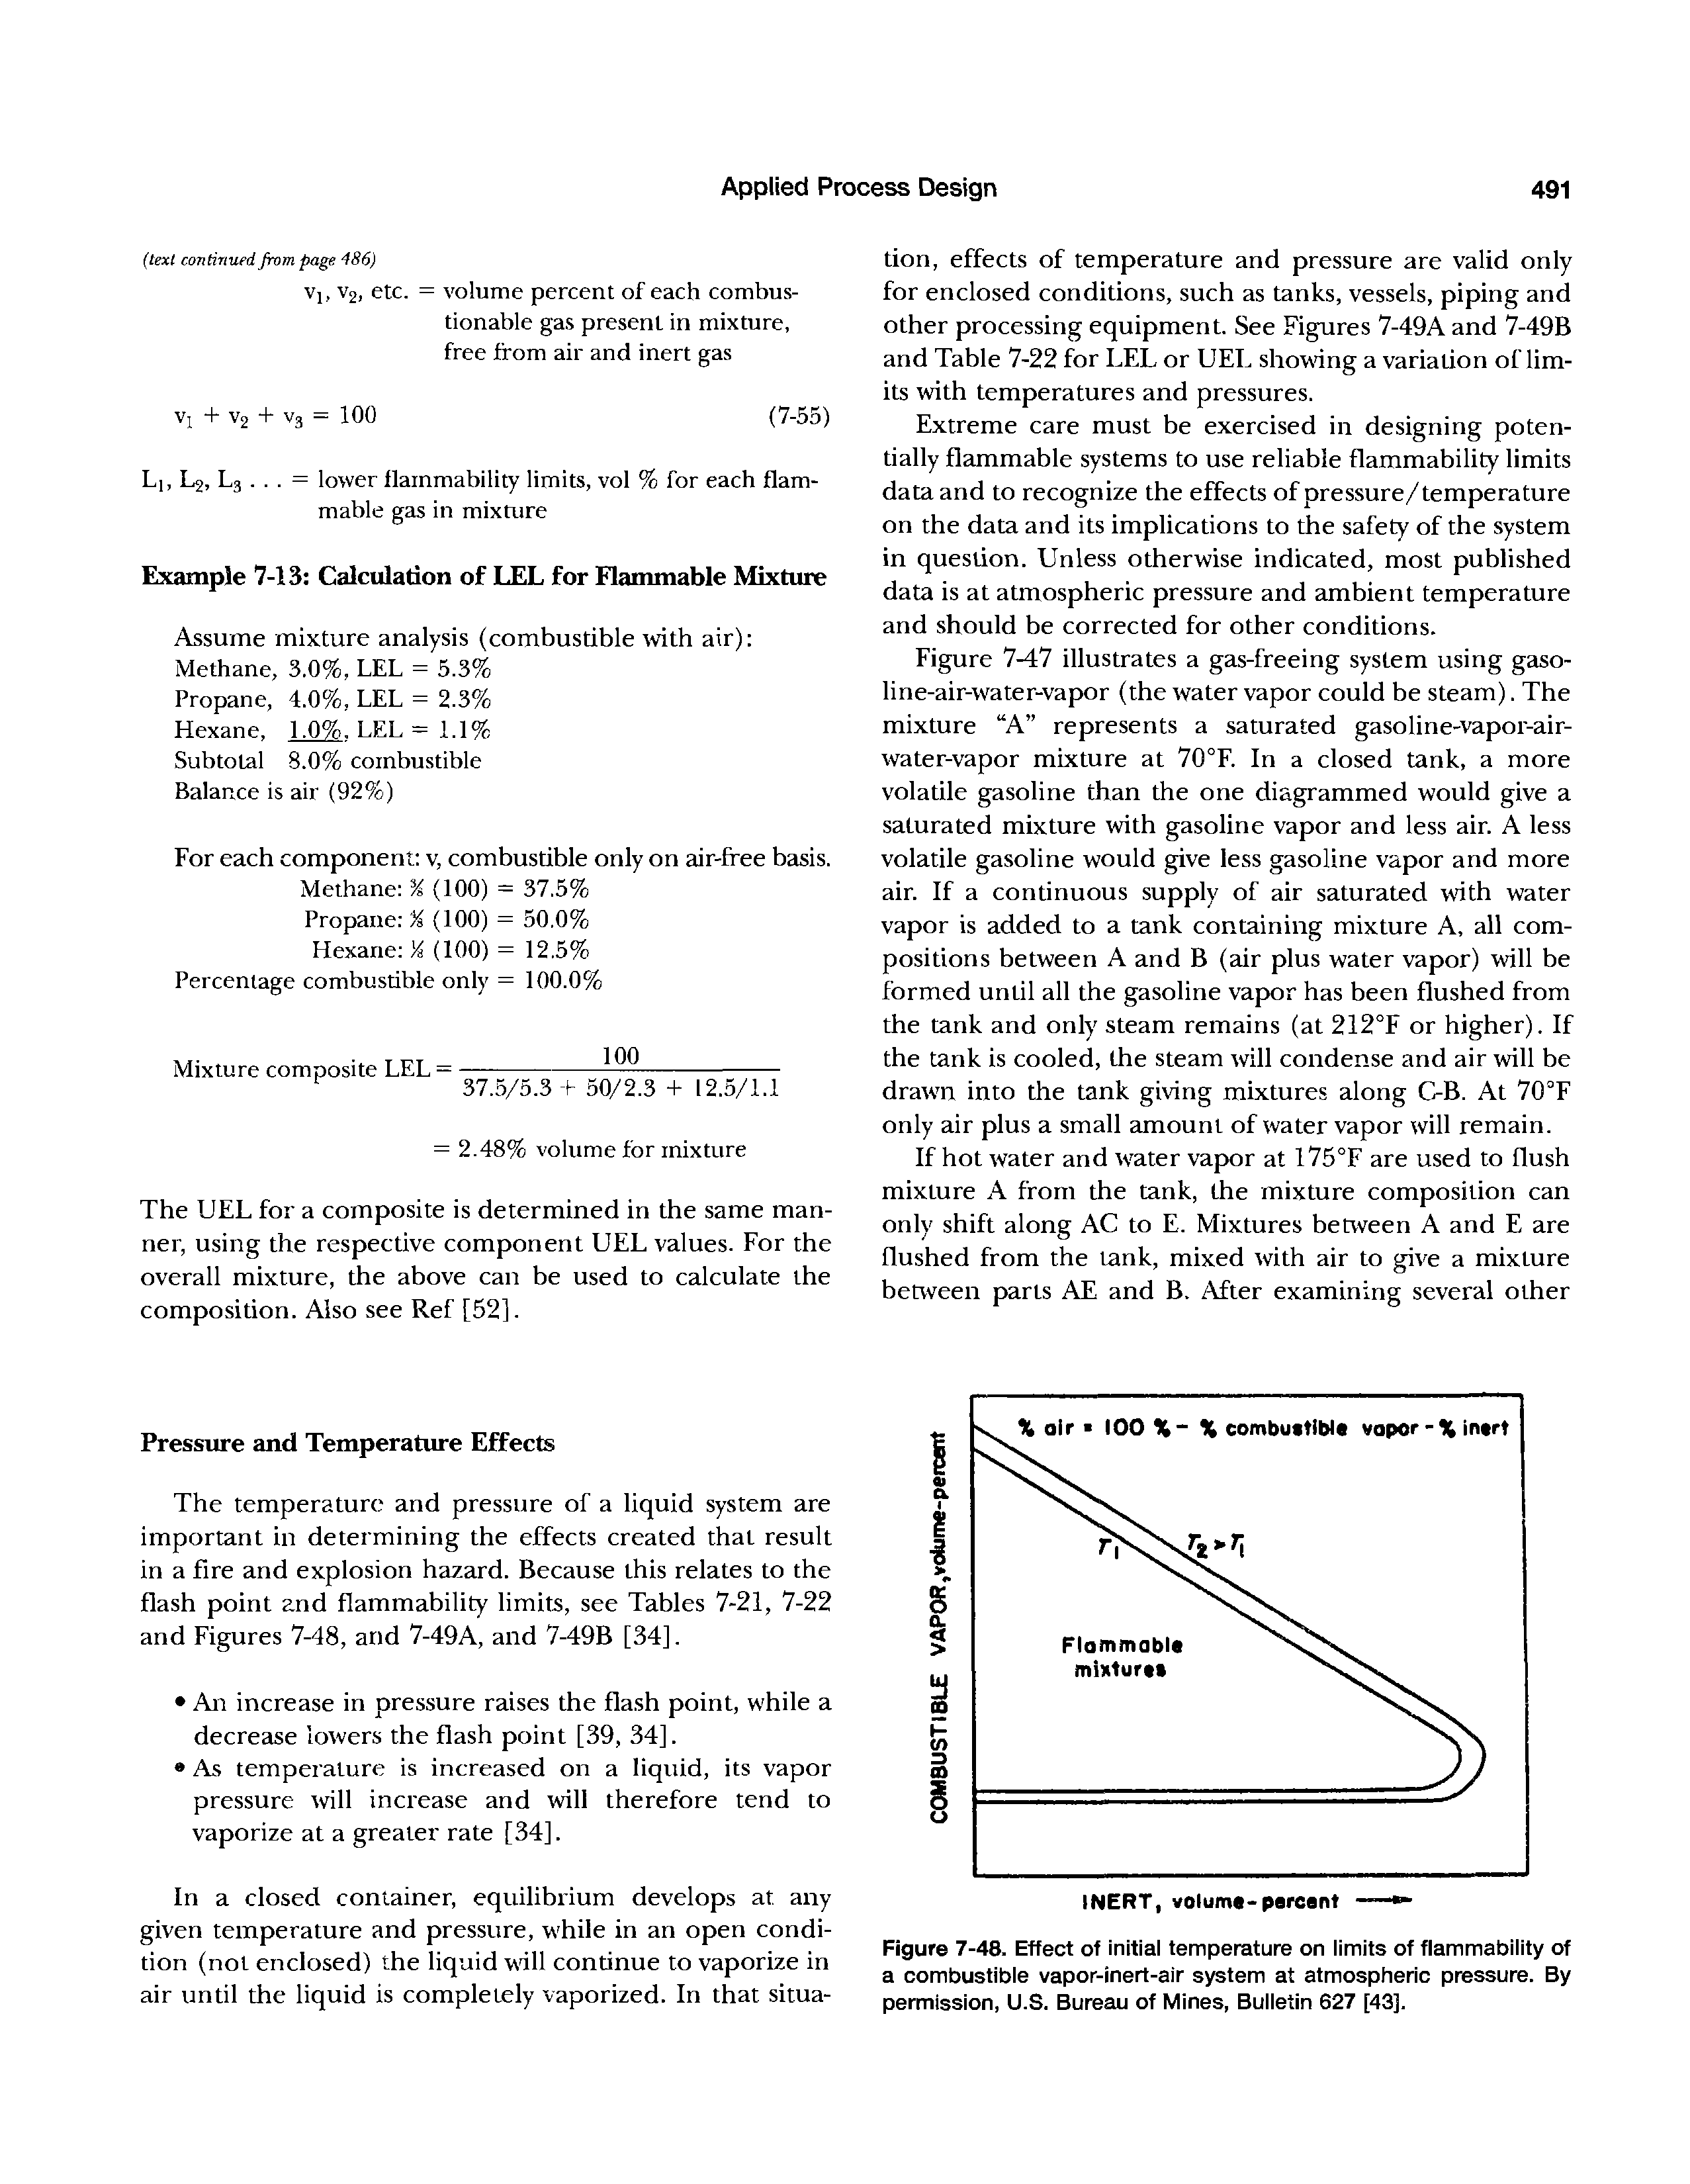 Figure 7-48. Effect of initial temperature on limits of flammability of a combustible vapor-inert-air system at atmospheric pressure. By permission, U.S. Bureau of Mines, Bulletin 627 [43].